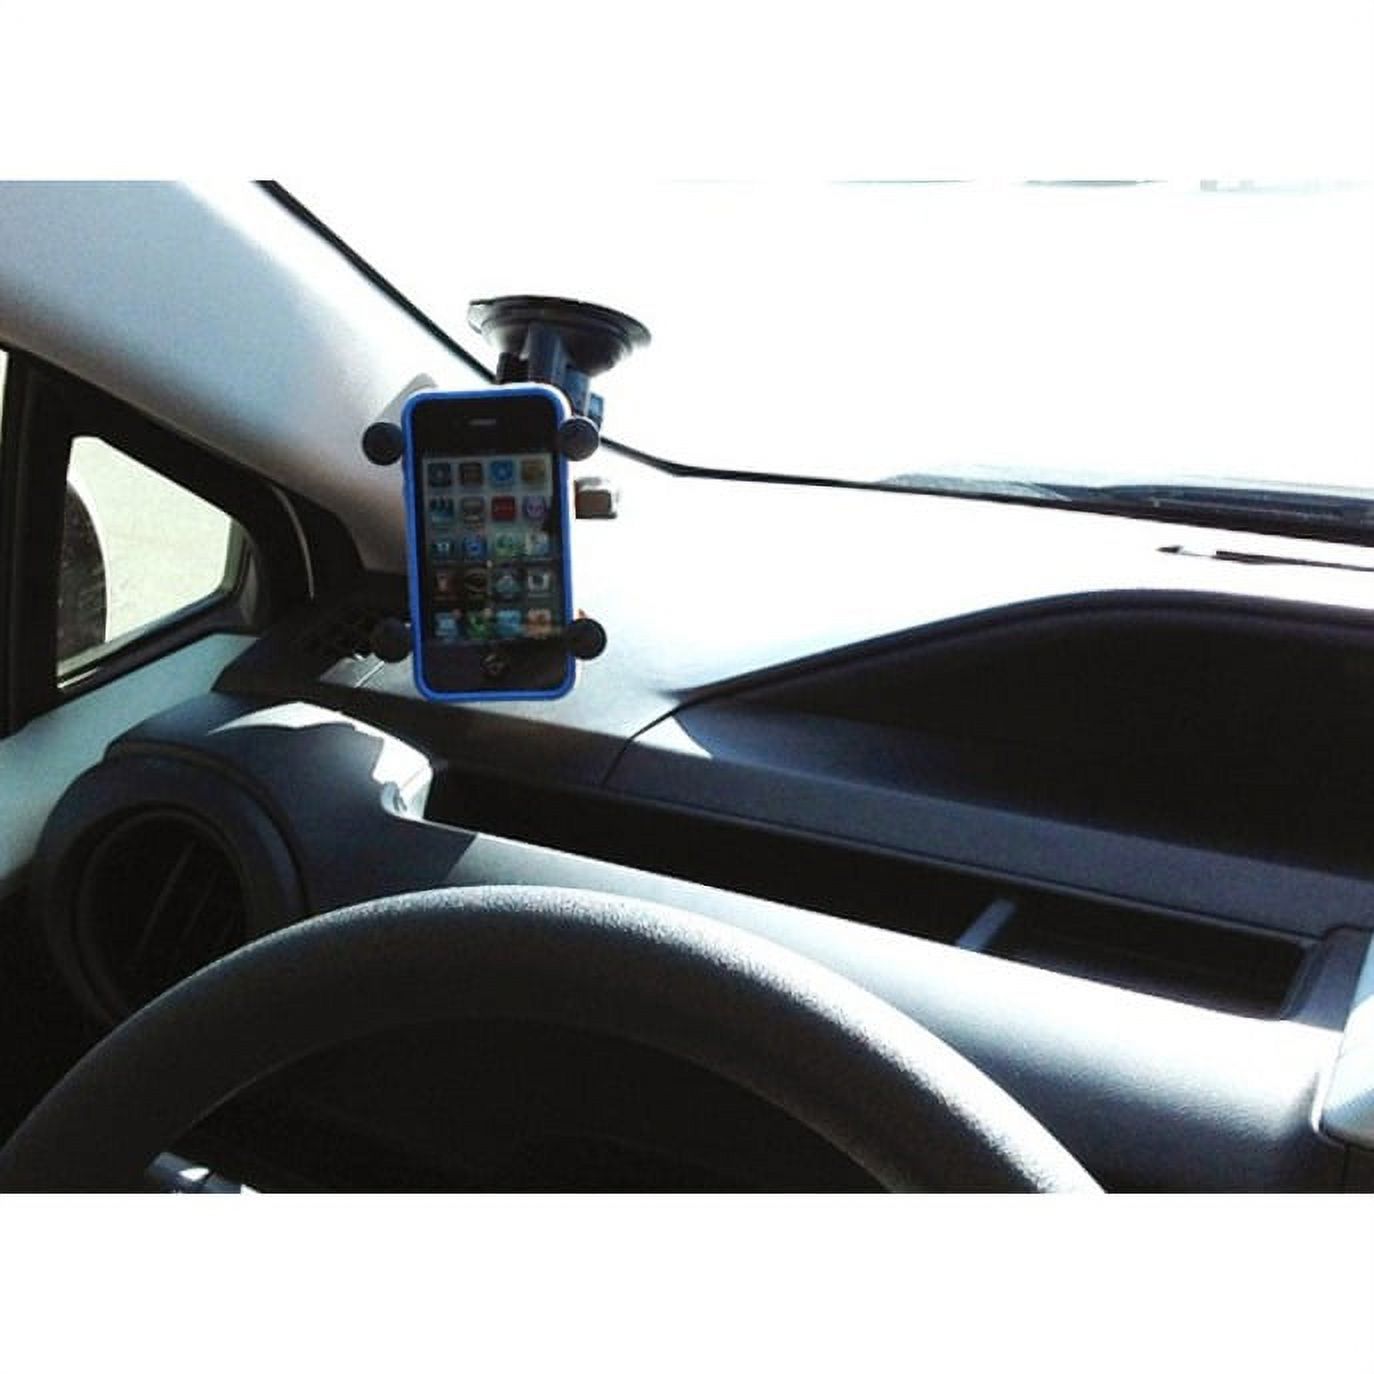 Ram Twist Lock Suction Cup Mount with Universal X-Grip Cell Phone holder - image 5 of 9